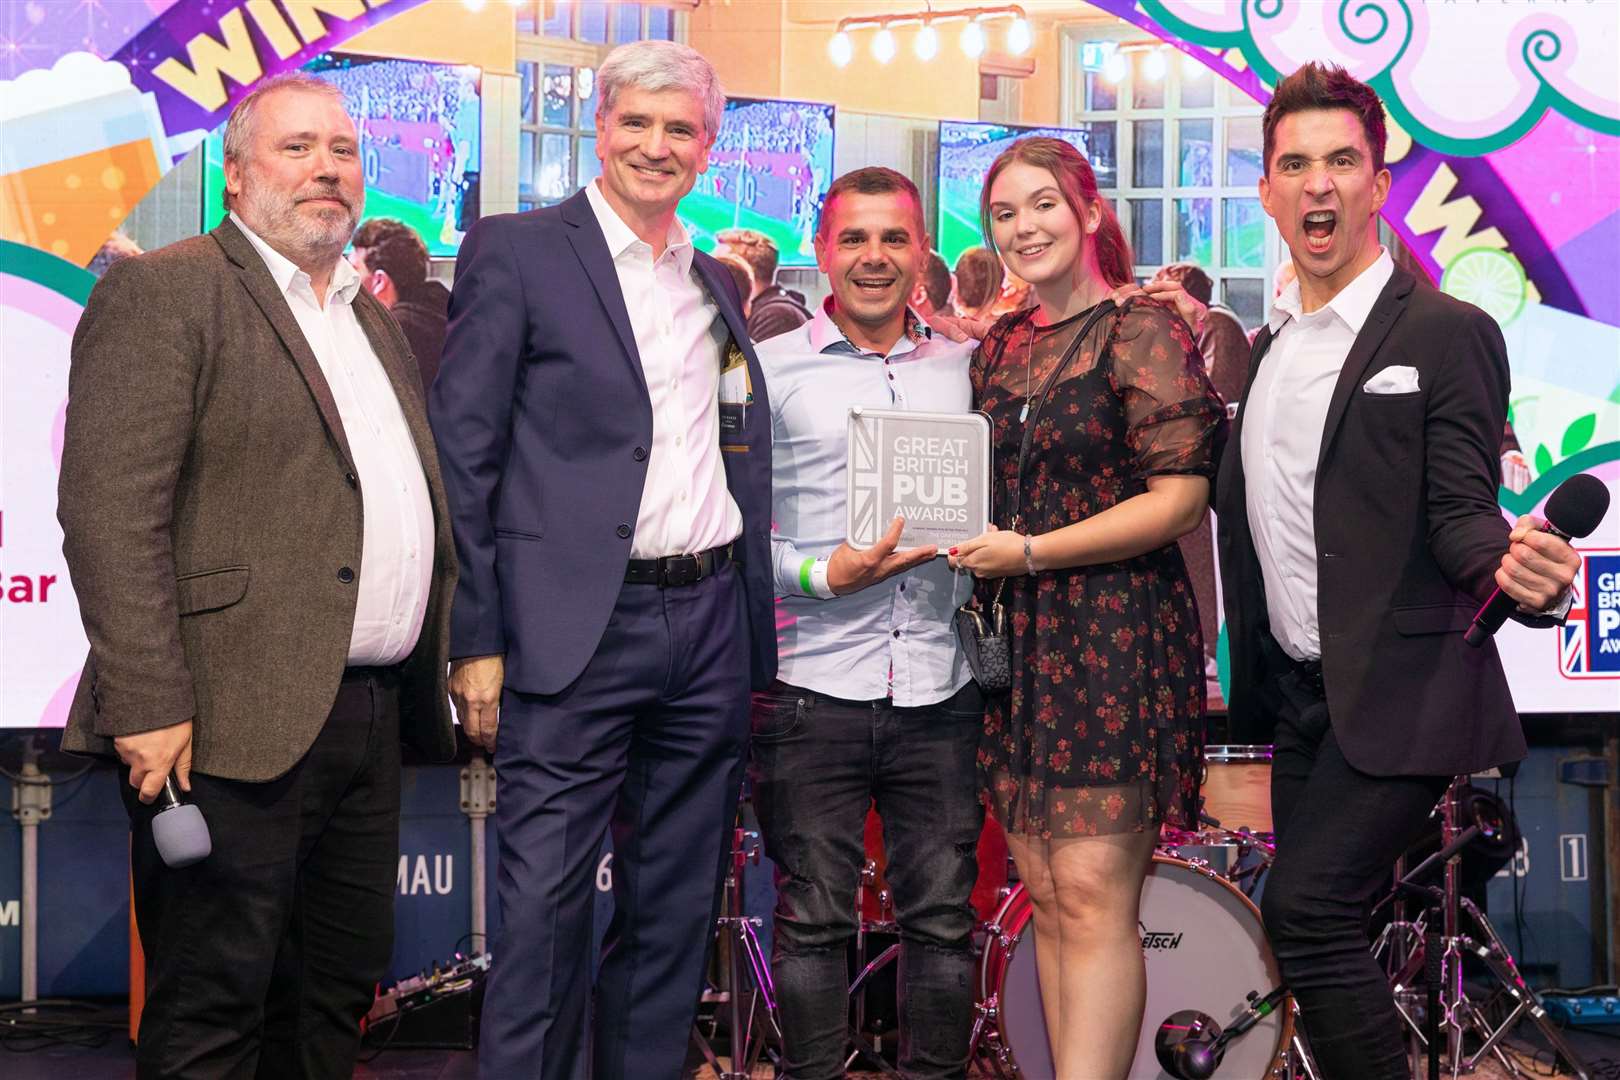 Dartford Sports Bar won Admiral Pub of the Year at the Great British Pub Awards, pictured with comedian Russell Kane